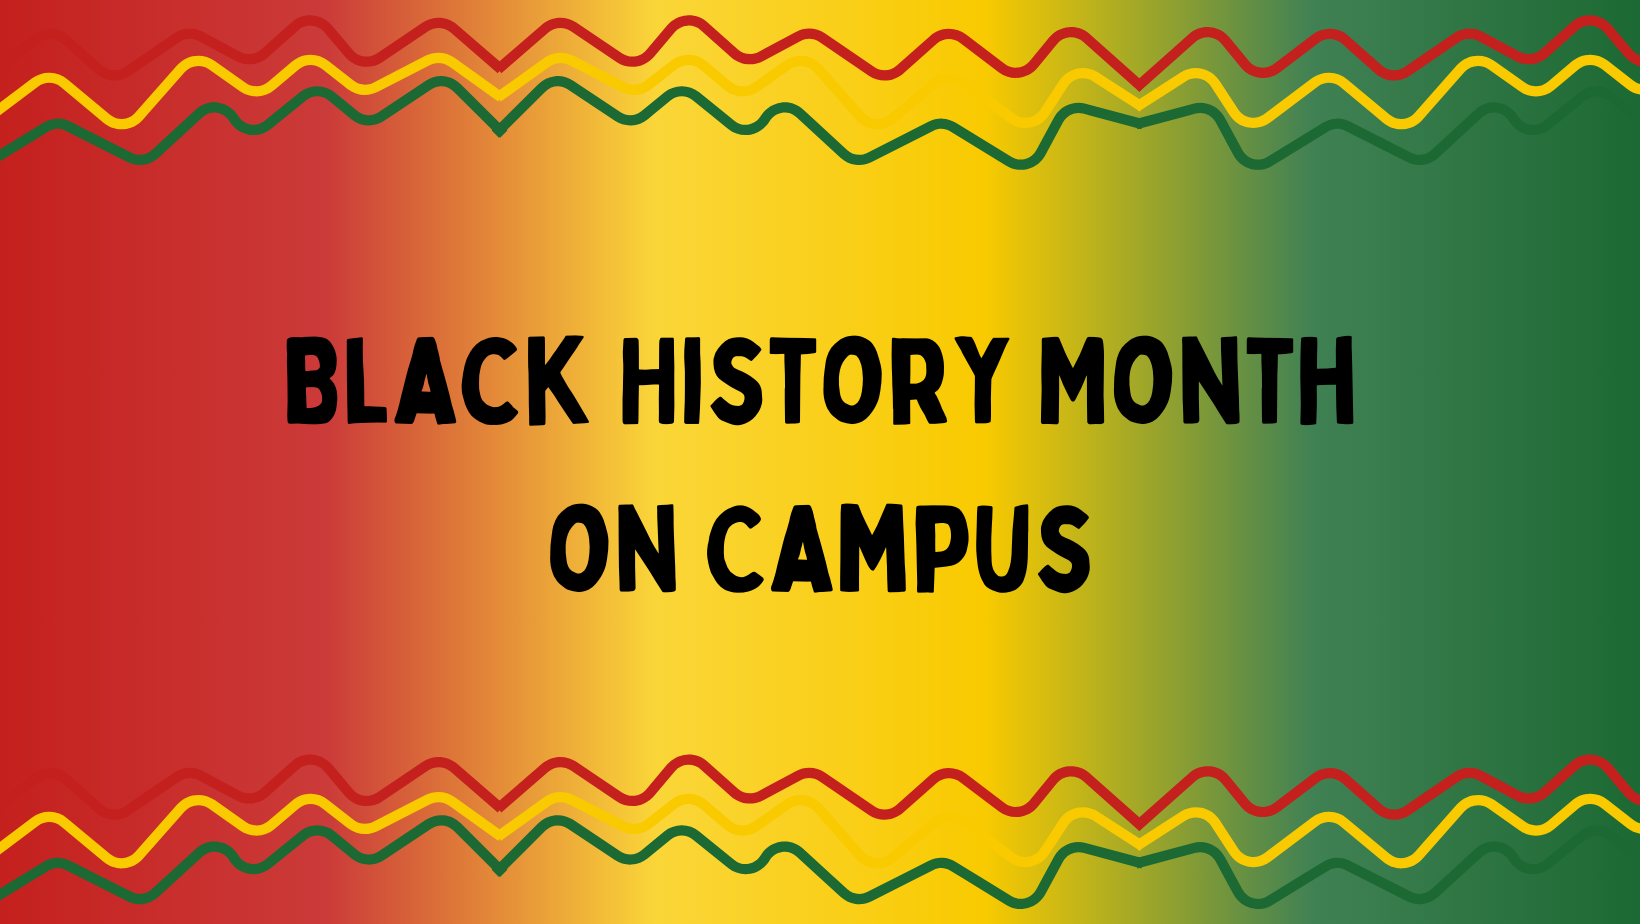 Black History Month on Campus